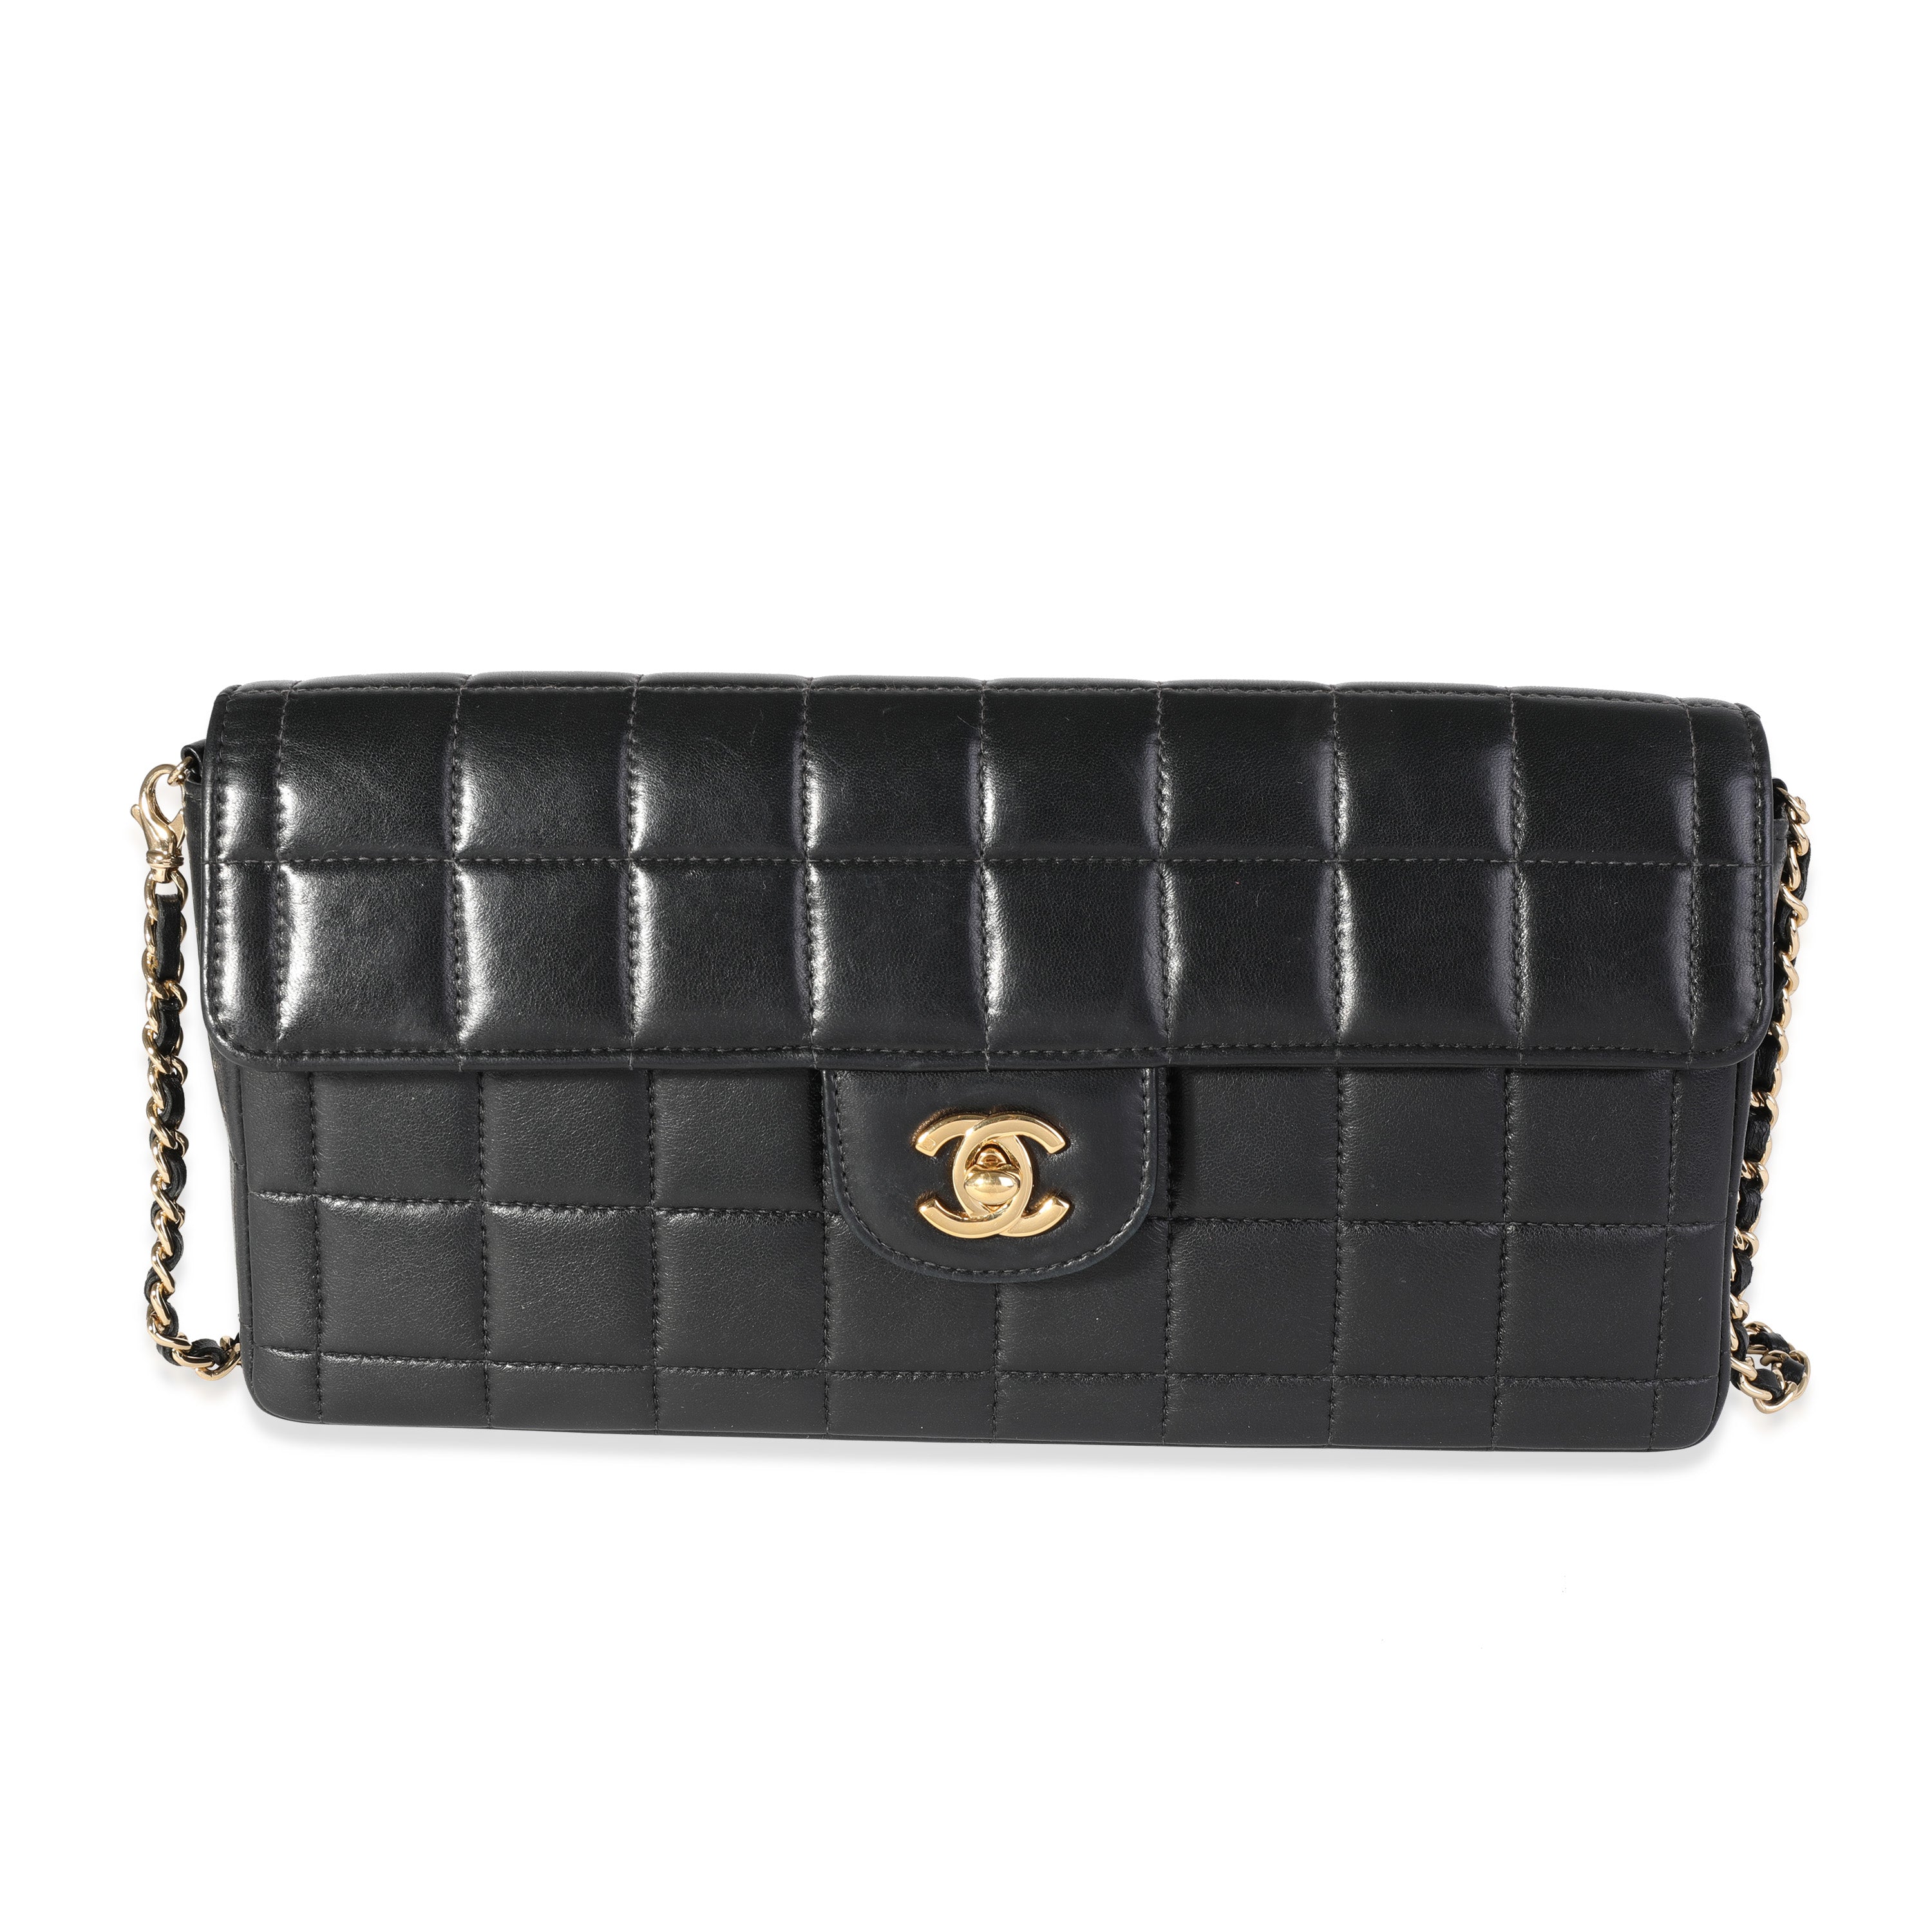 CHANEL Large Briefcases for Women, Authenticity Guaranteed